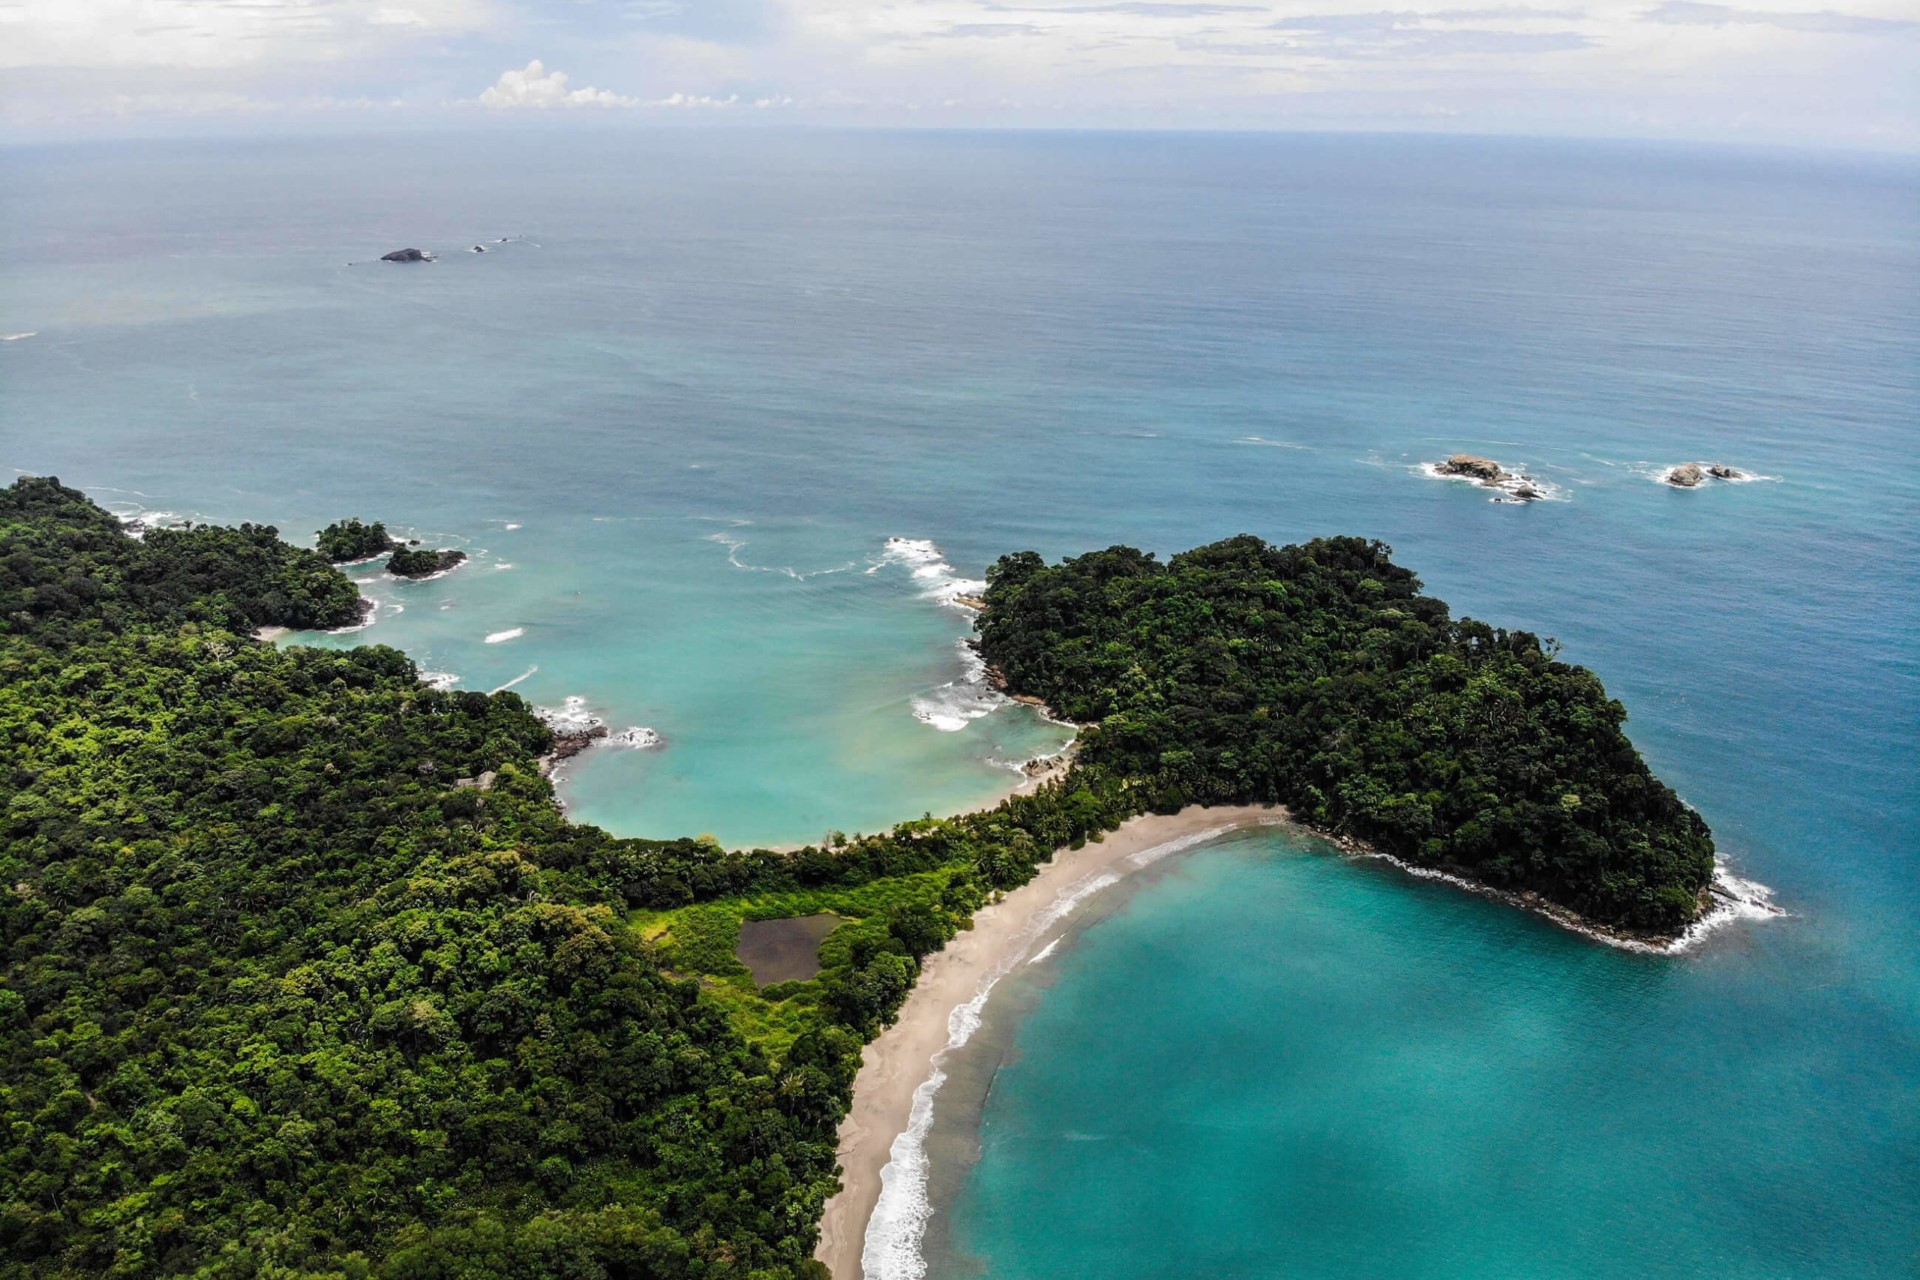 Aerial view of a lush tropical Costa Rican coastline with emerald waters caressing golden sandy beaches, embraced by the dense greenery of a forest.